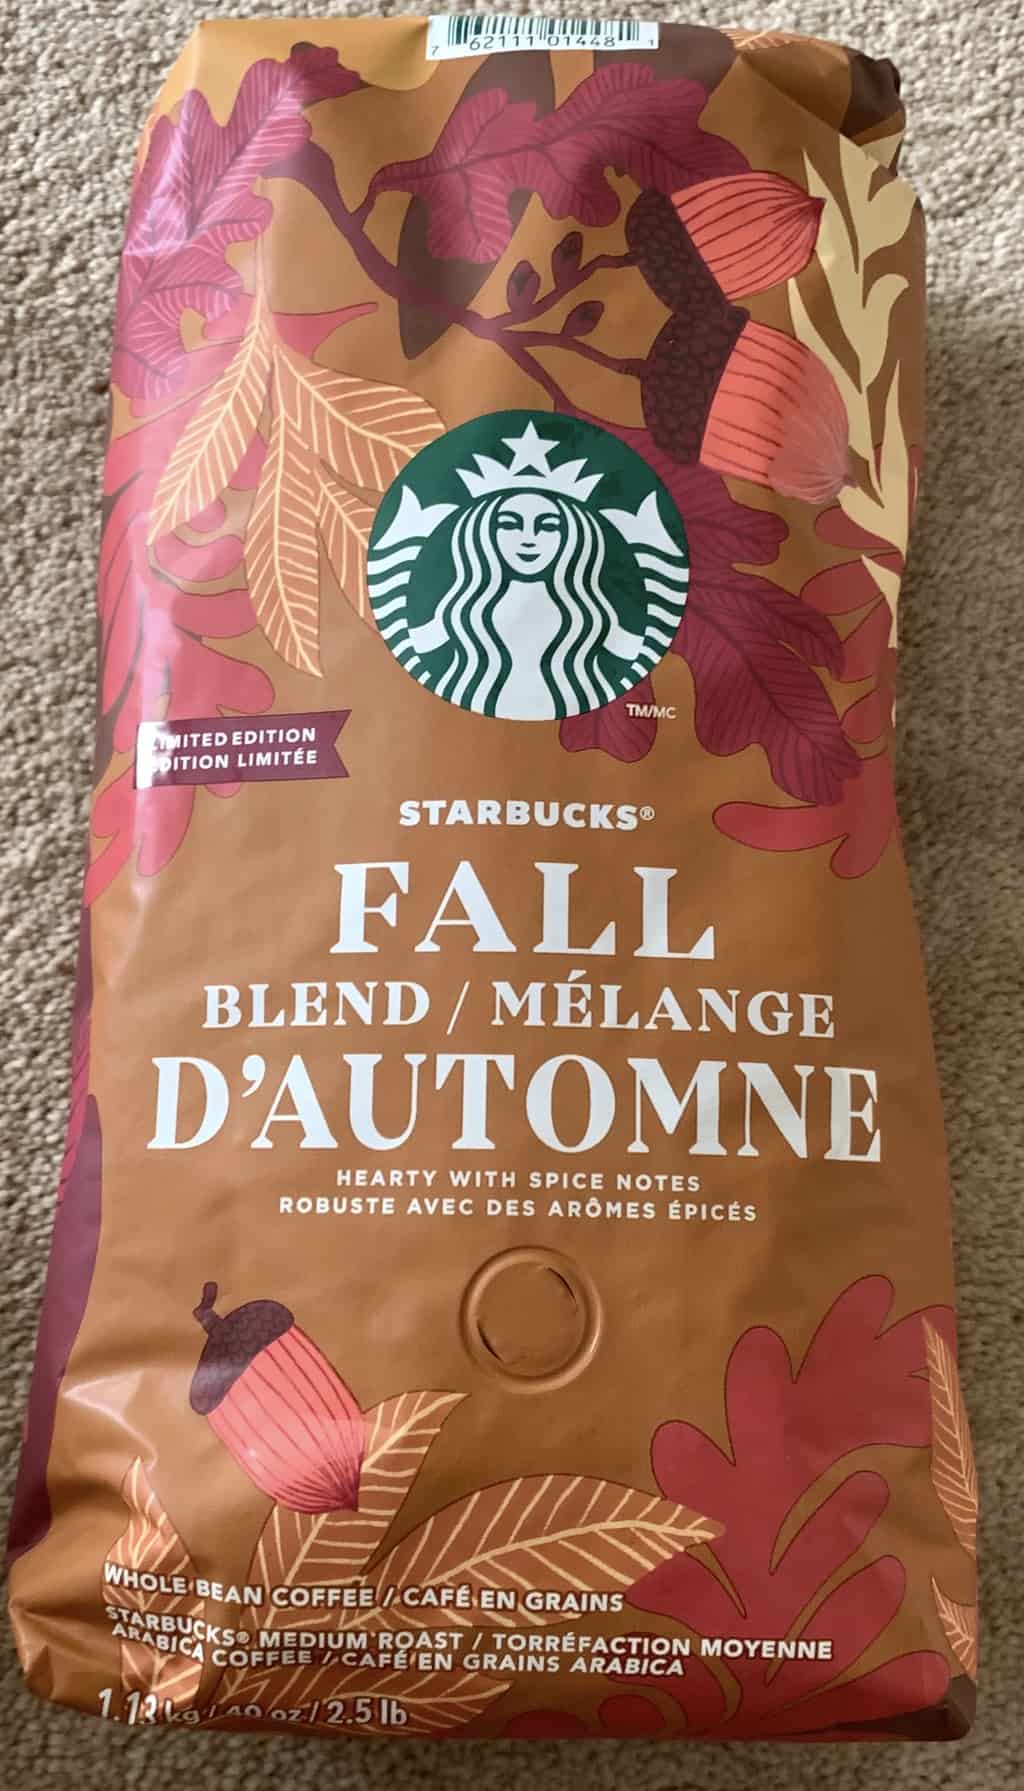 starbucks coffee beans come from